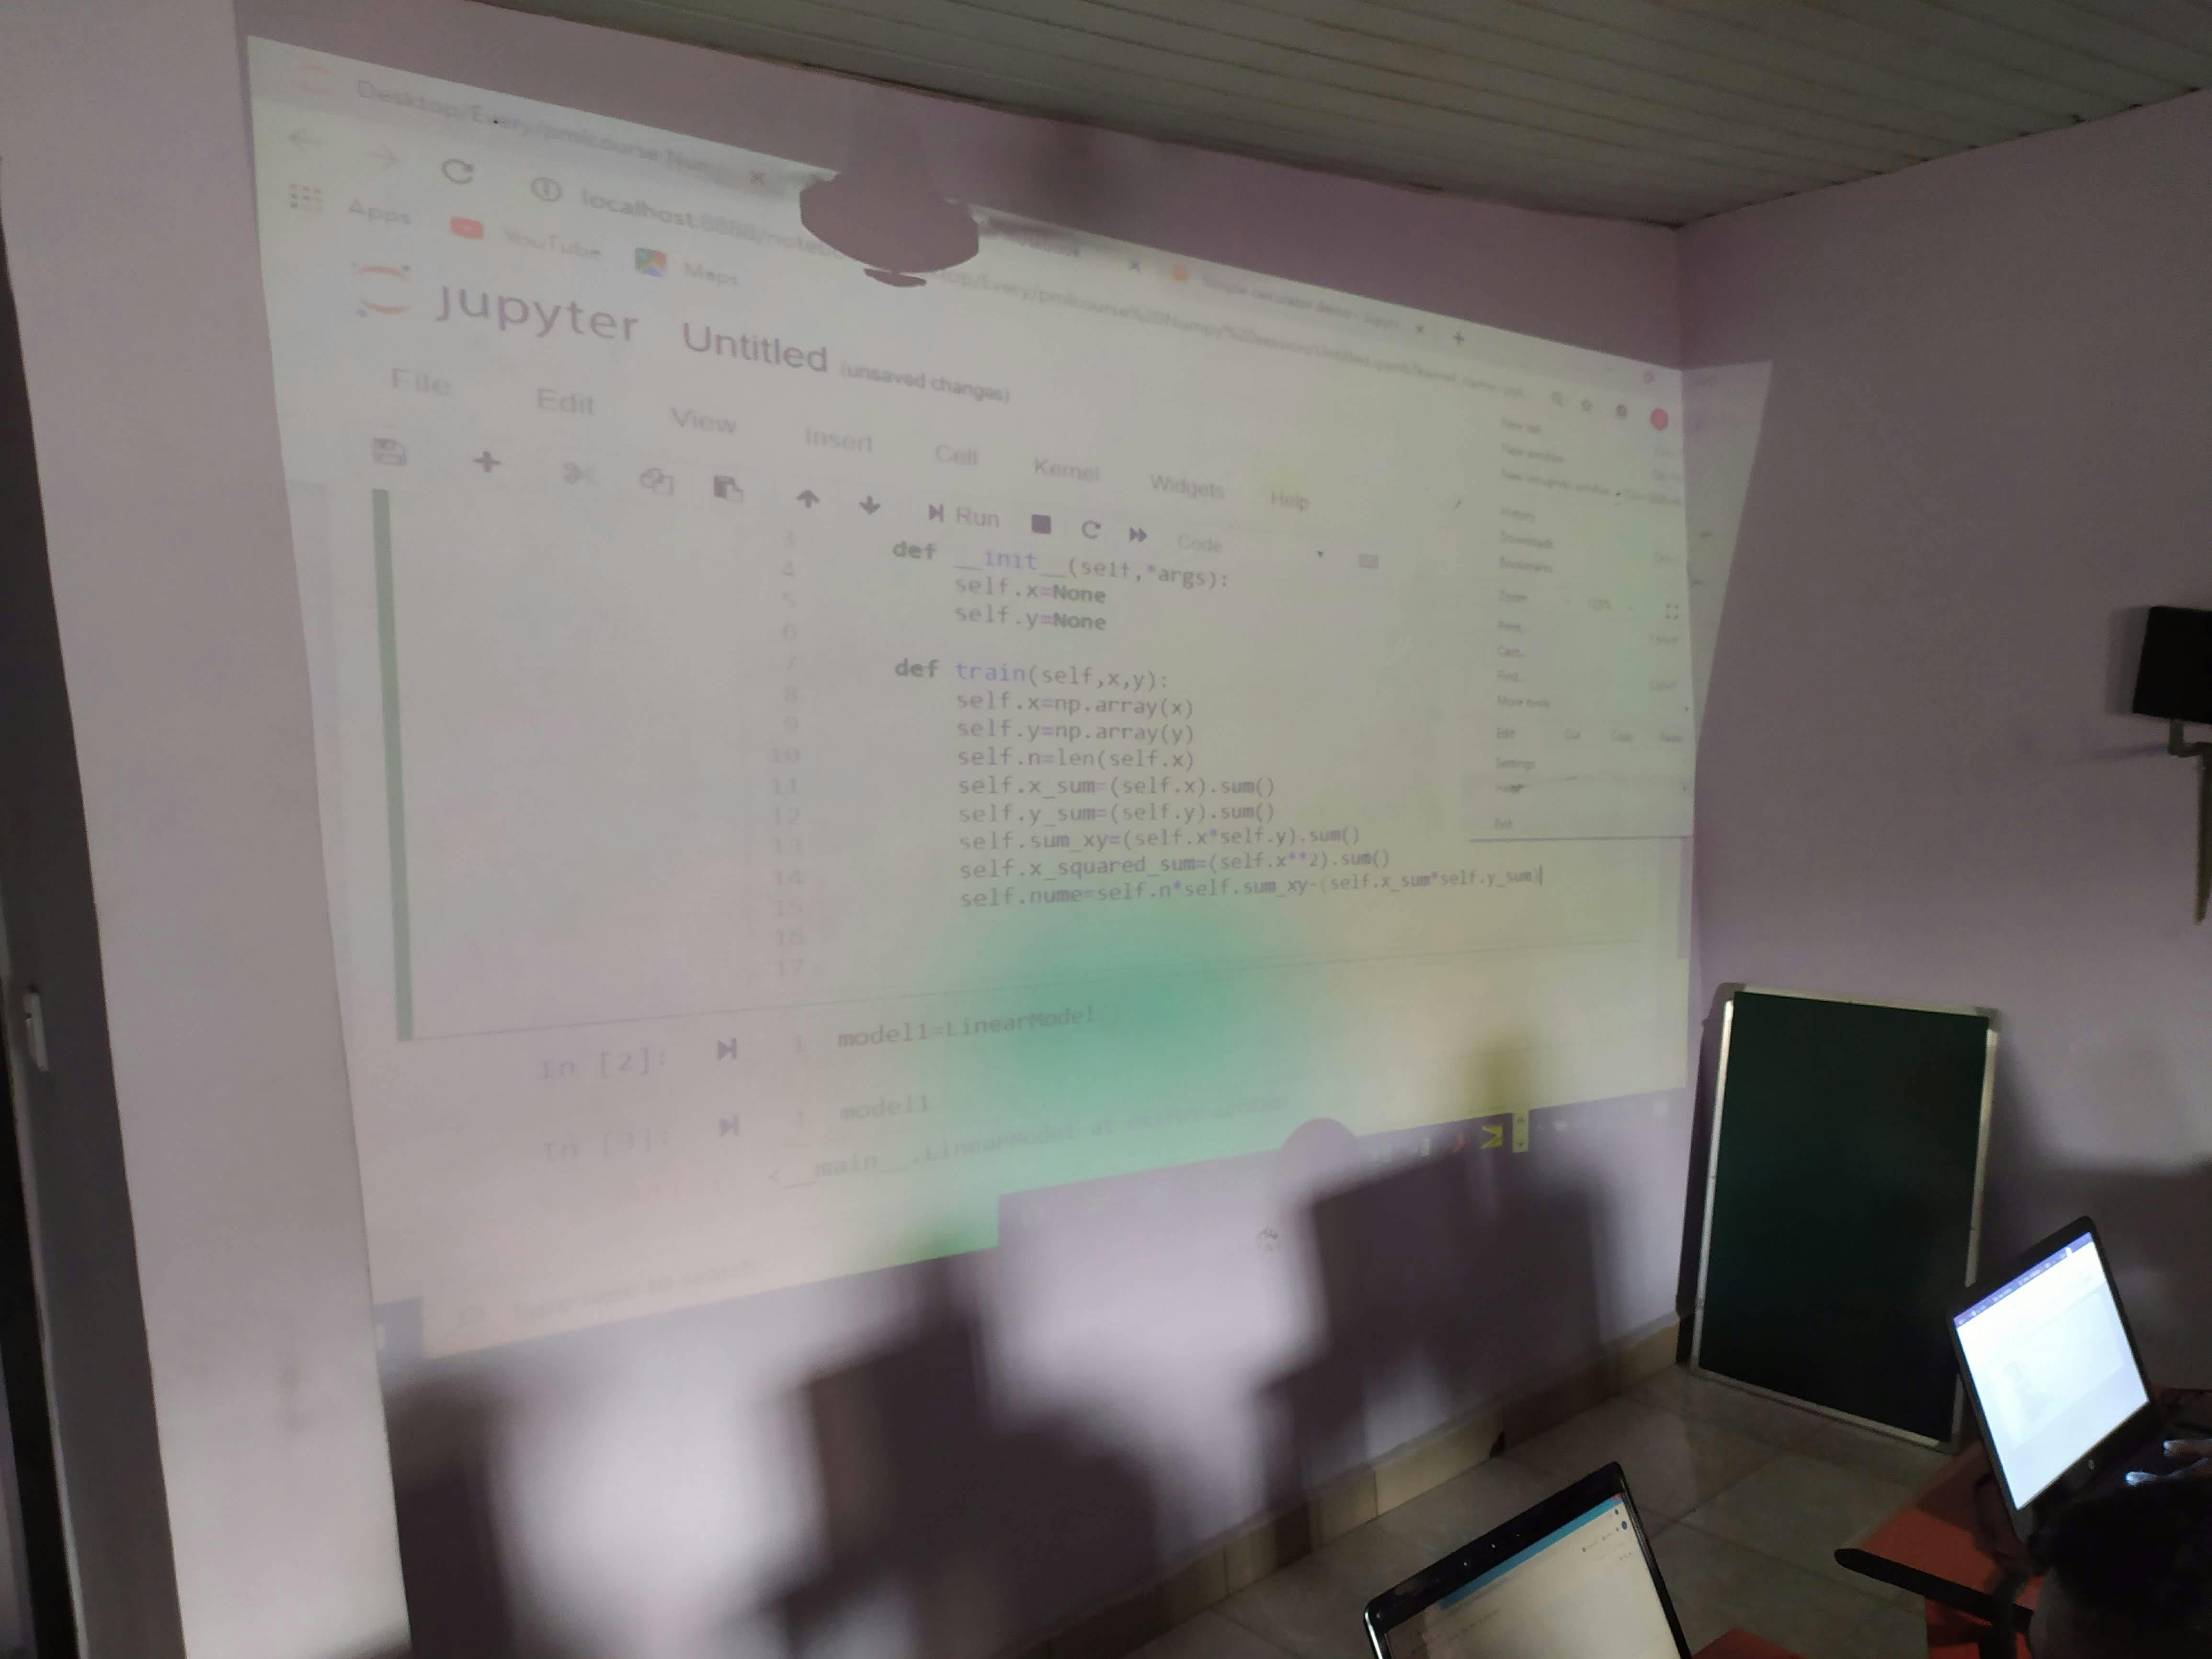 Projected content to the wall, containing a bunch of code.